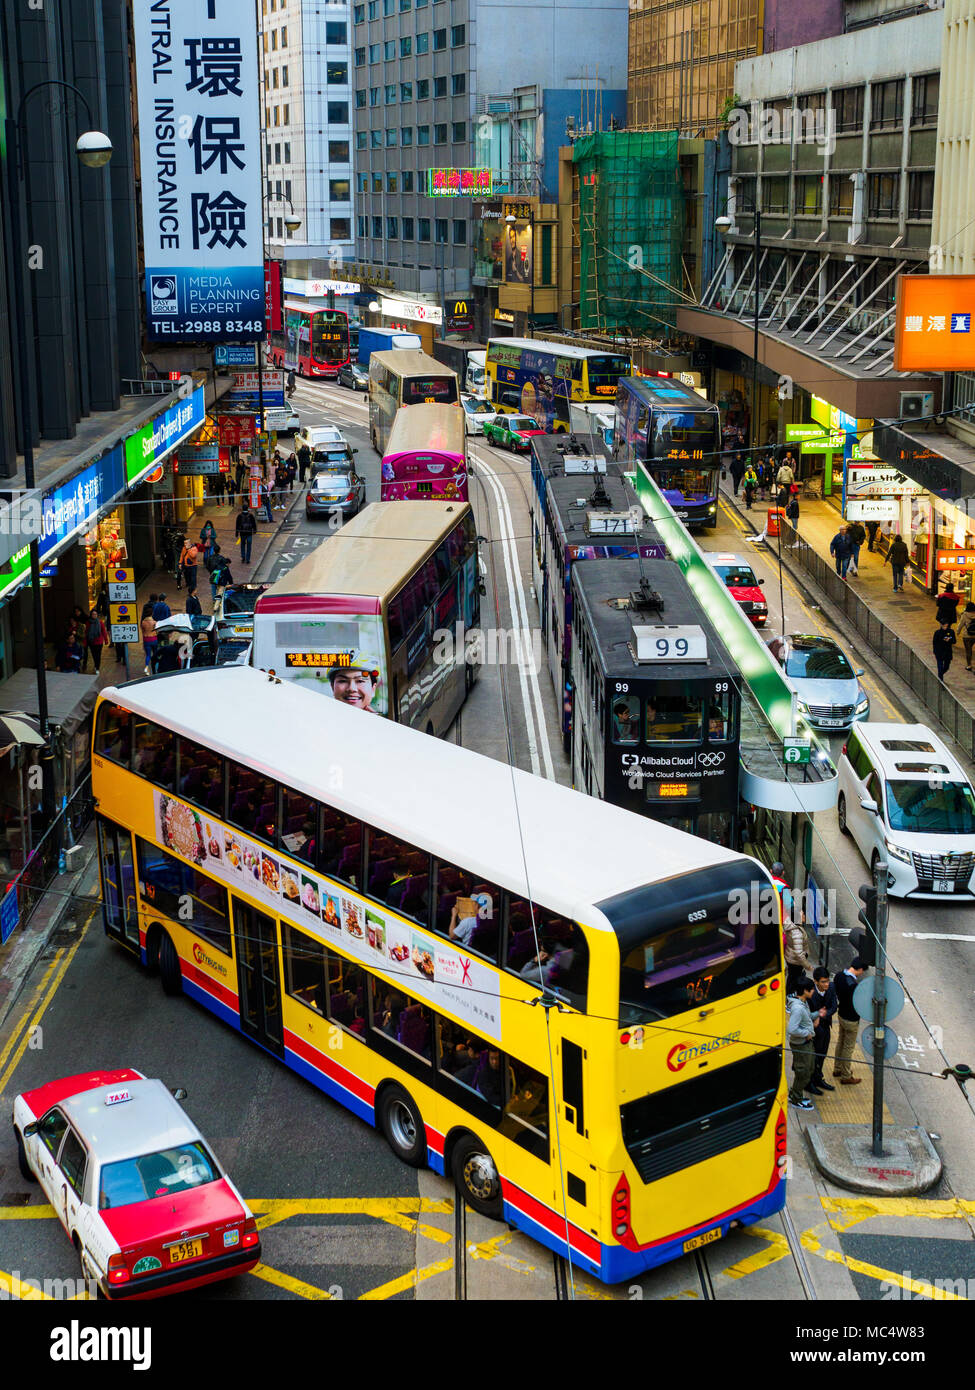 Hong Kong Traffic congestion - Buses Trams and Taxis mix in Central Hong Kong. Stock Photo